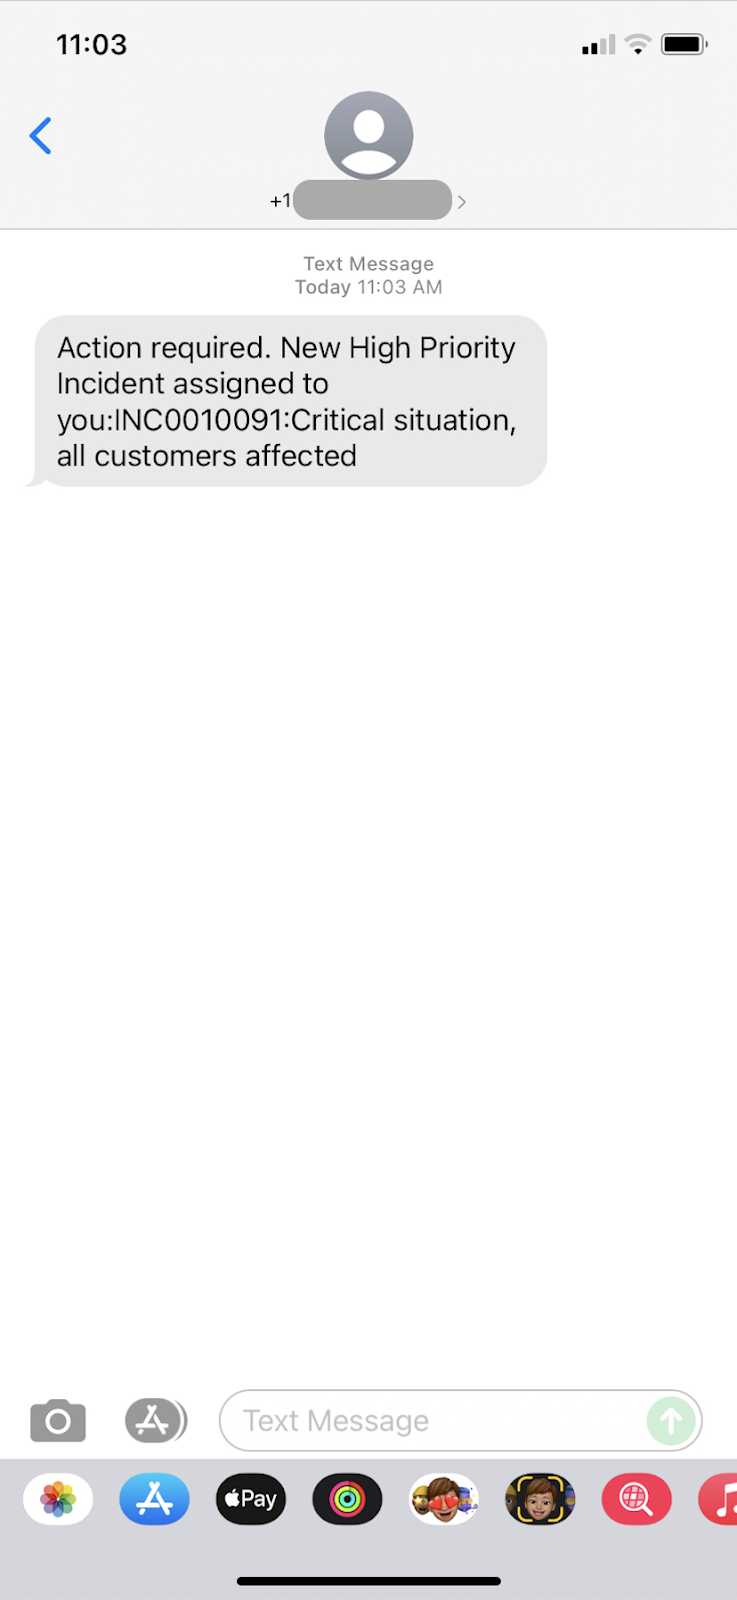 A screenshot of the SMS message sent by ServiceNow Notify